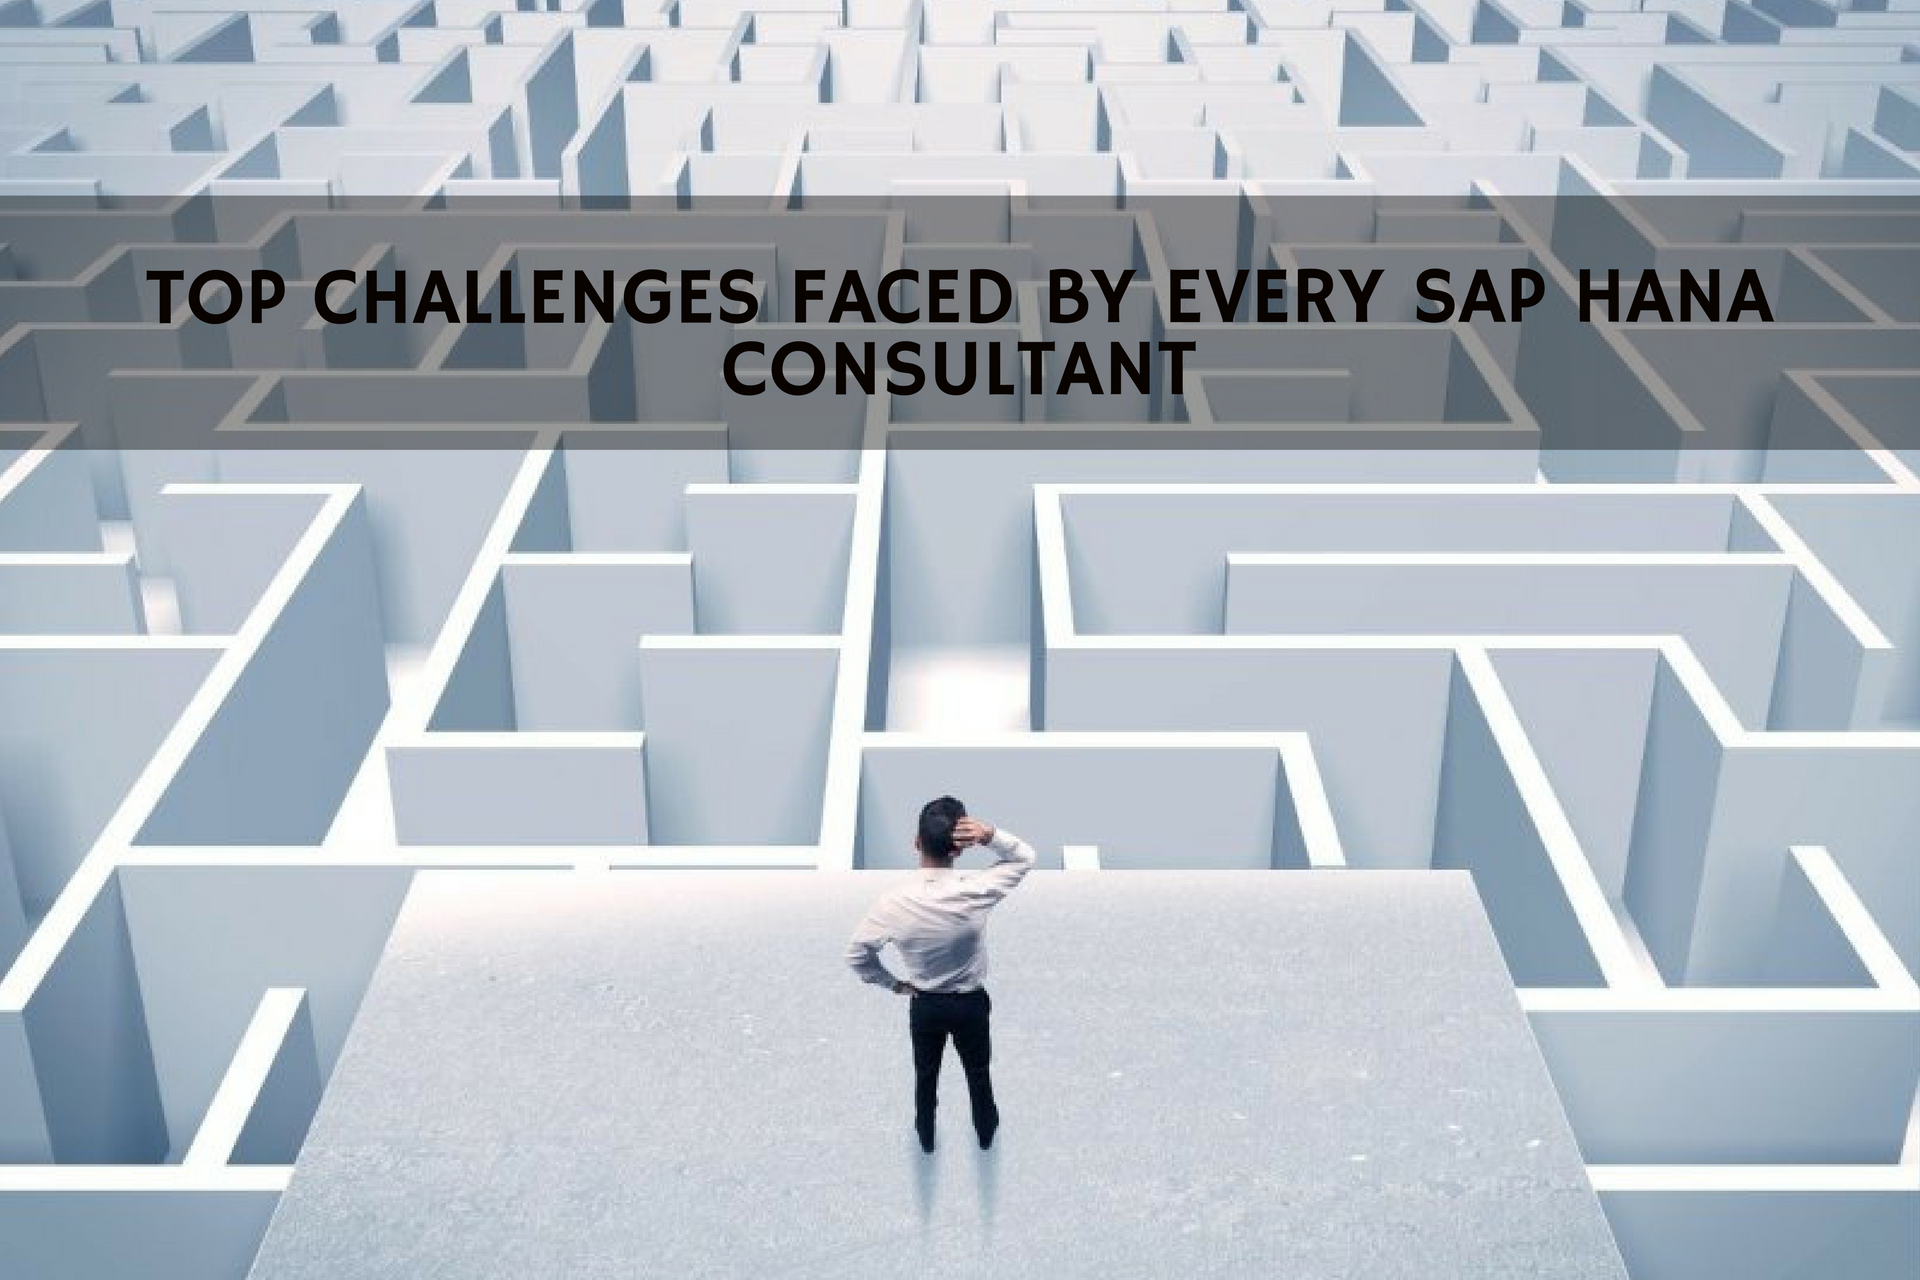 Top challenges faced by every SAP HANA Consultant